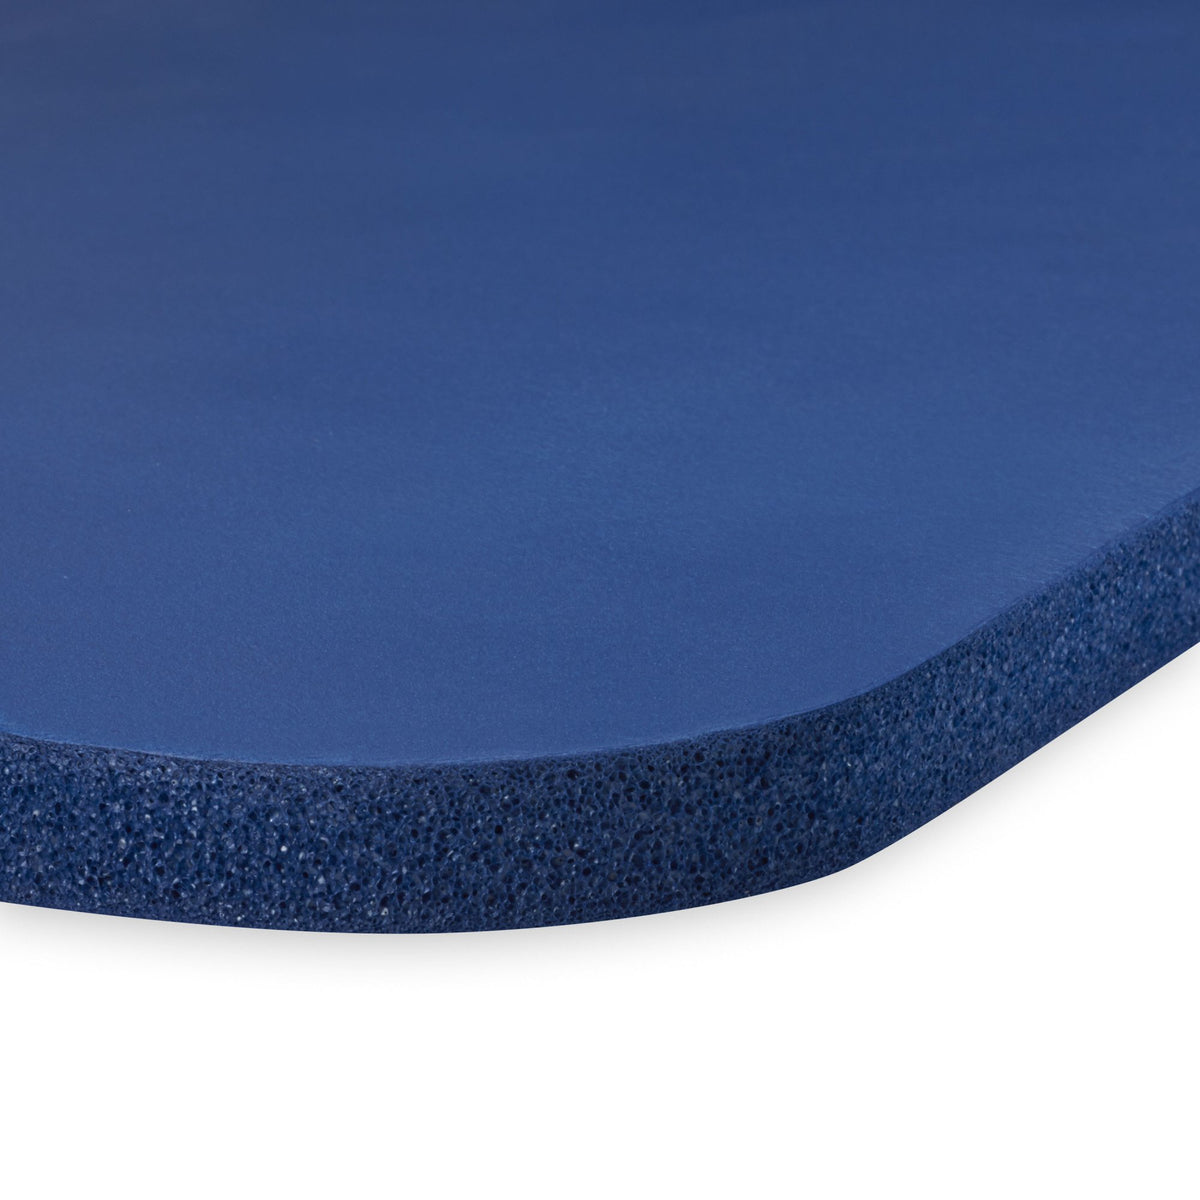 Thickness of the blue SPRI Exercise mat